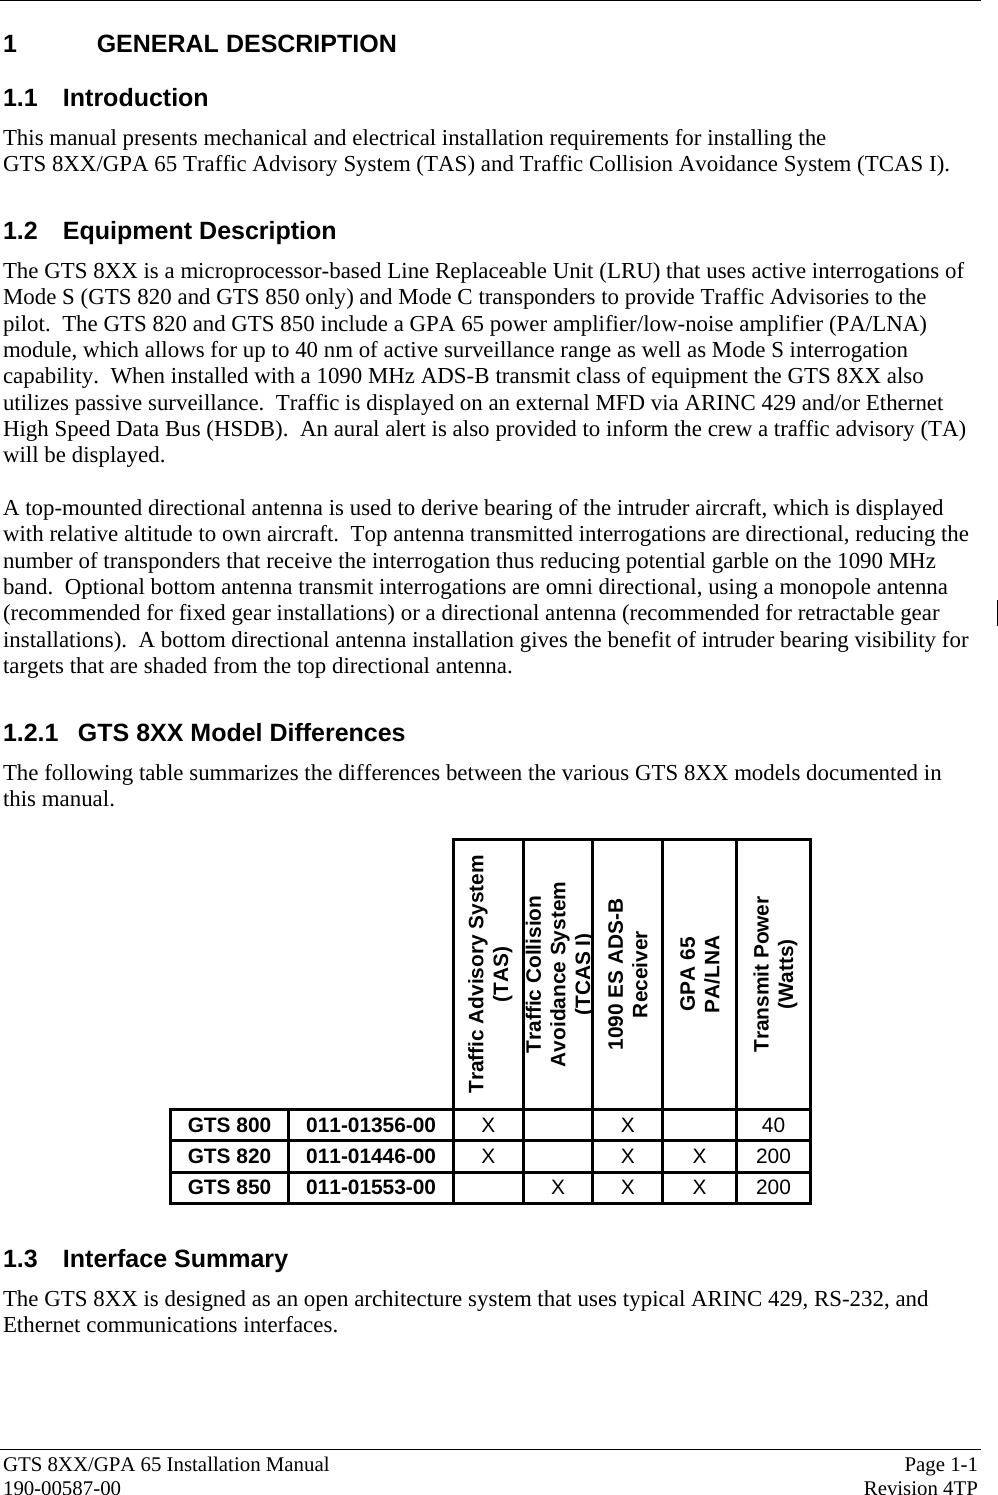  GTS 8XX/GPA 65 Installation Manual  Page 1-1 190-00587-00  Revision 4TP 1 GENERAL DESCRIPTION 1.1 Introduction This manual presents mechanical and electrical installation requirements for installing the  GTS 8XX/GPA 65 Traffic Advisory System (TAS) and Traffic Collision Avoidance System (TCAS I).  1.2 Equipment Description The GTS 8XX is a microprocessor-based Line Replaceable Unit (LRU) that uses active interrogations of Mode S (GTS 820 and GTS 850 only) and Mode C transponders to provide Traffic Advisories to the pilot.  The GTS 820 and GTS 850 include a GPA 65 power amplifier/low-noise amplifier (PA/LNA) module, which allows for up to 40 nm of active surveillance range as well as Mode S interrogation capability.  When installed with a 1090 MHz ADS-B transmit class of equipment the GTS 8XX also utilizes passive surveillance.  Traffic is displayed on an external MFD via ARINC 429 and/or Ethernet High Speed Data Bus (HSDB).  An aural alert is also provided to inform the crew a traffic advisory (TA) will be displayed.  A top-mounted directional antenna is used to derive bearing of the intruder aircraft, which is displayed with relative altitude to own aircraft.  Top antenna transmitted interrogations are directional, reducing the number of transponders that receive the interrogation thus reducing potential garble on the 1090 MHz band.  Optional bottom antenna transmit interrogations are omni directional, using a monopole antenna (recommended for fixed gear installations) or a directional antenna (recommended for retractable gear installations).  A bottom directional antenna installation gives the benefit of intruder bearing visibility for targets that are shaded from the top directional antenna.  1.2.1  GTS 8XX Model Differences The following table summarizes the differences between the various GTS 8XX models documented in this manual.    Traffic Advisory System (TAS) Traffic Collision Avoidance System (TCAS I) 1090 ES ADS-B Receiver GPA 65  PA/LNA Transmit Power (Watts) GTS 800  011-01356-00  X  X  40 GTS 820  011-01446-00  X  X X 200 GTS 850  011-01553-00   X X X 200  1.3 Interface Summary The GTS 8XX is designed as an open architecture system that uses typical ARINC 429, RS-232, and Ethernet communications interfaces. 